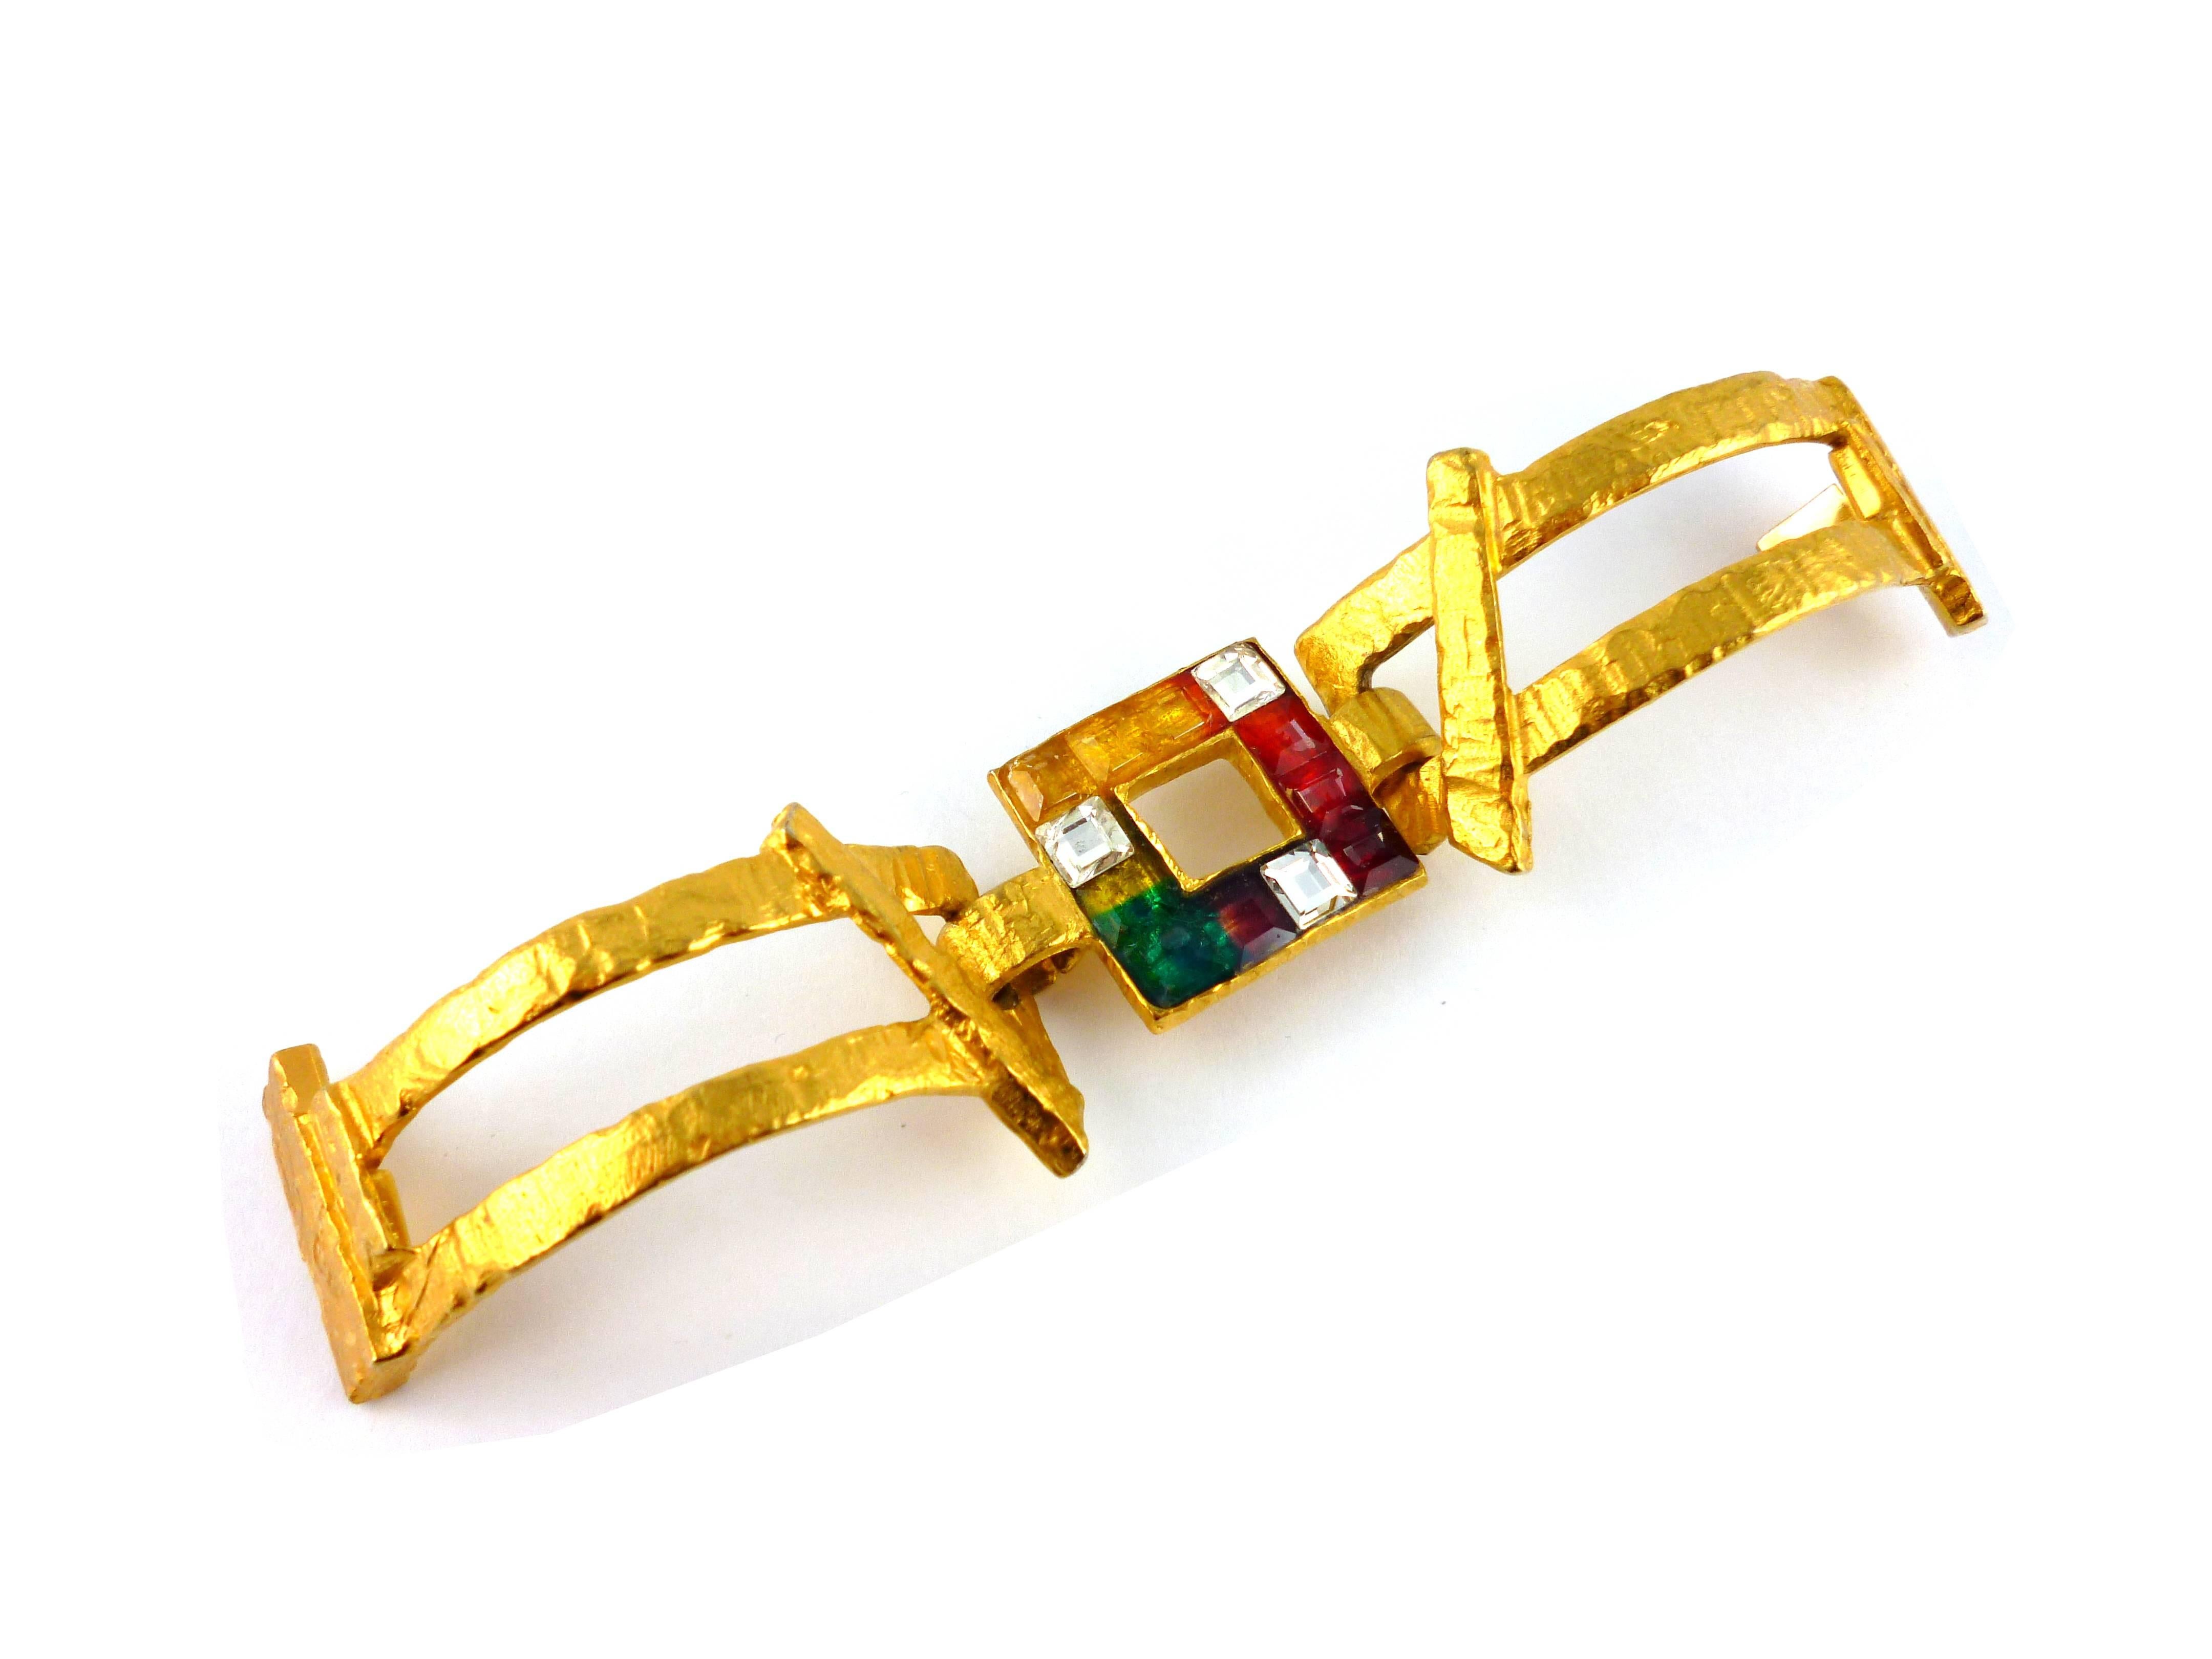 CHRISTIAN LACROIX jewelled cuff bracelet from the 